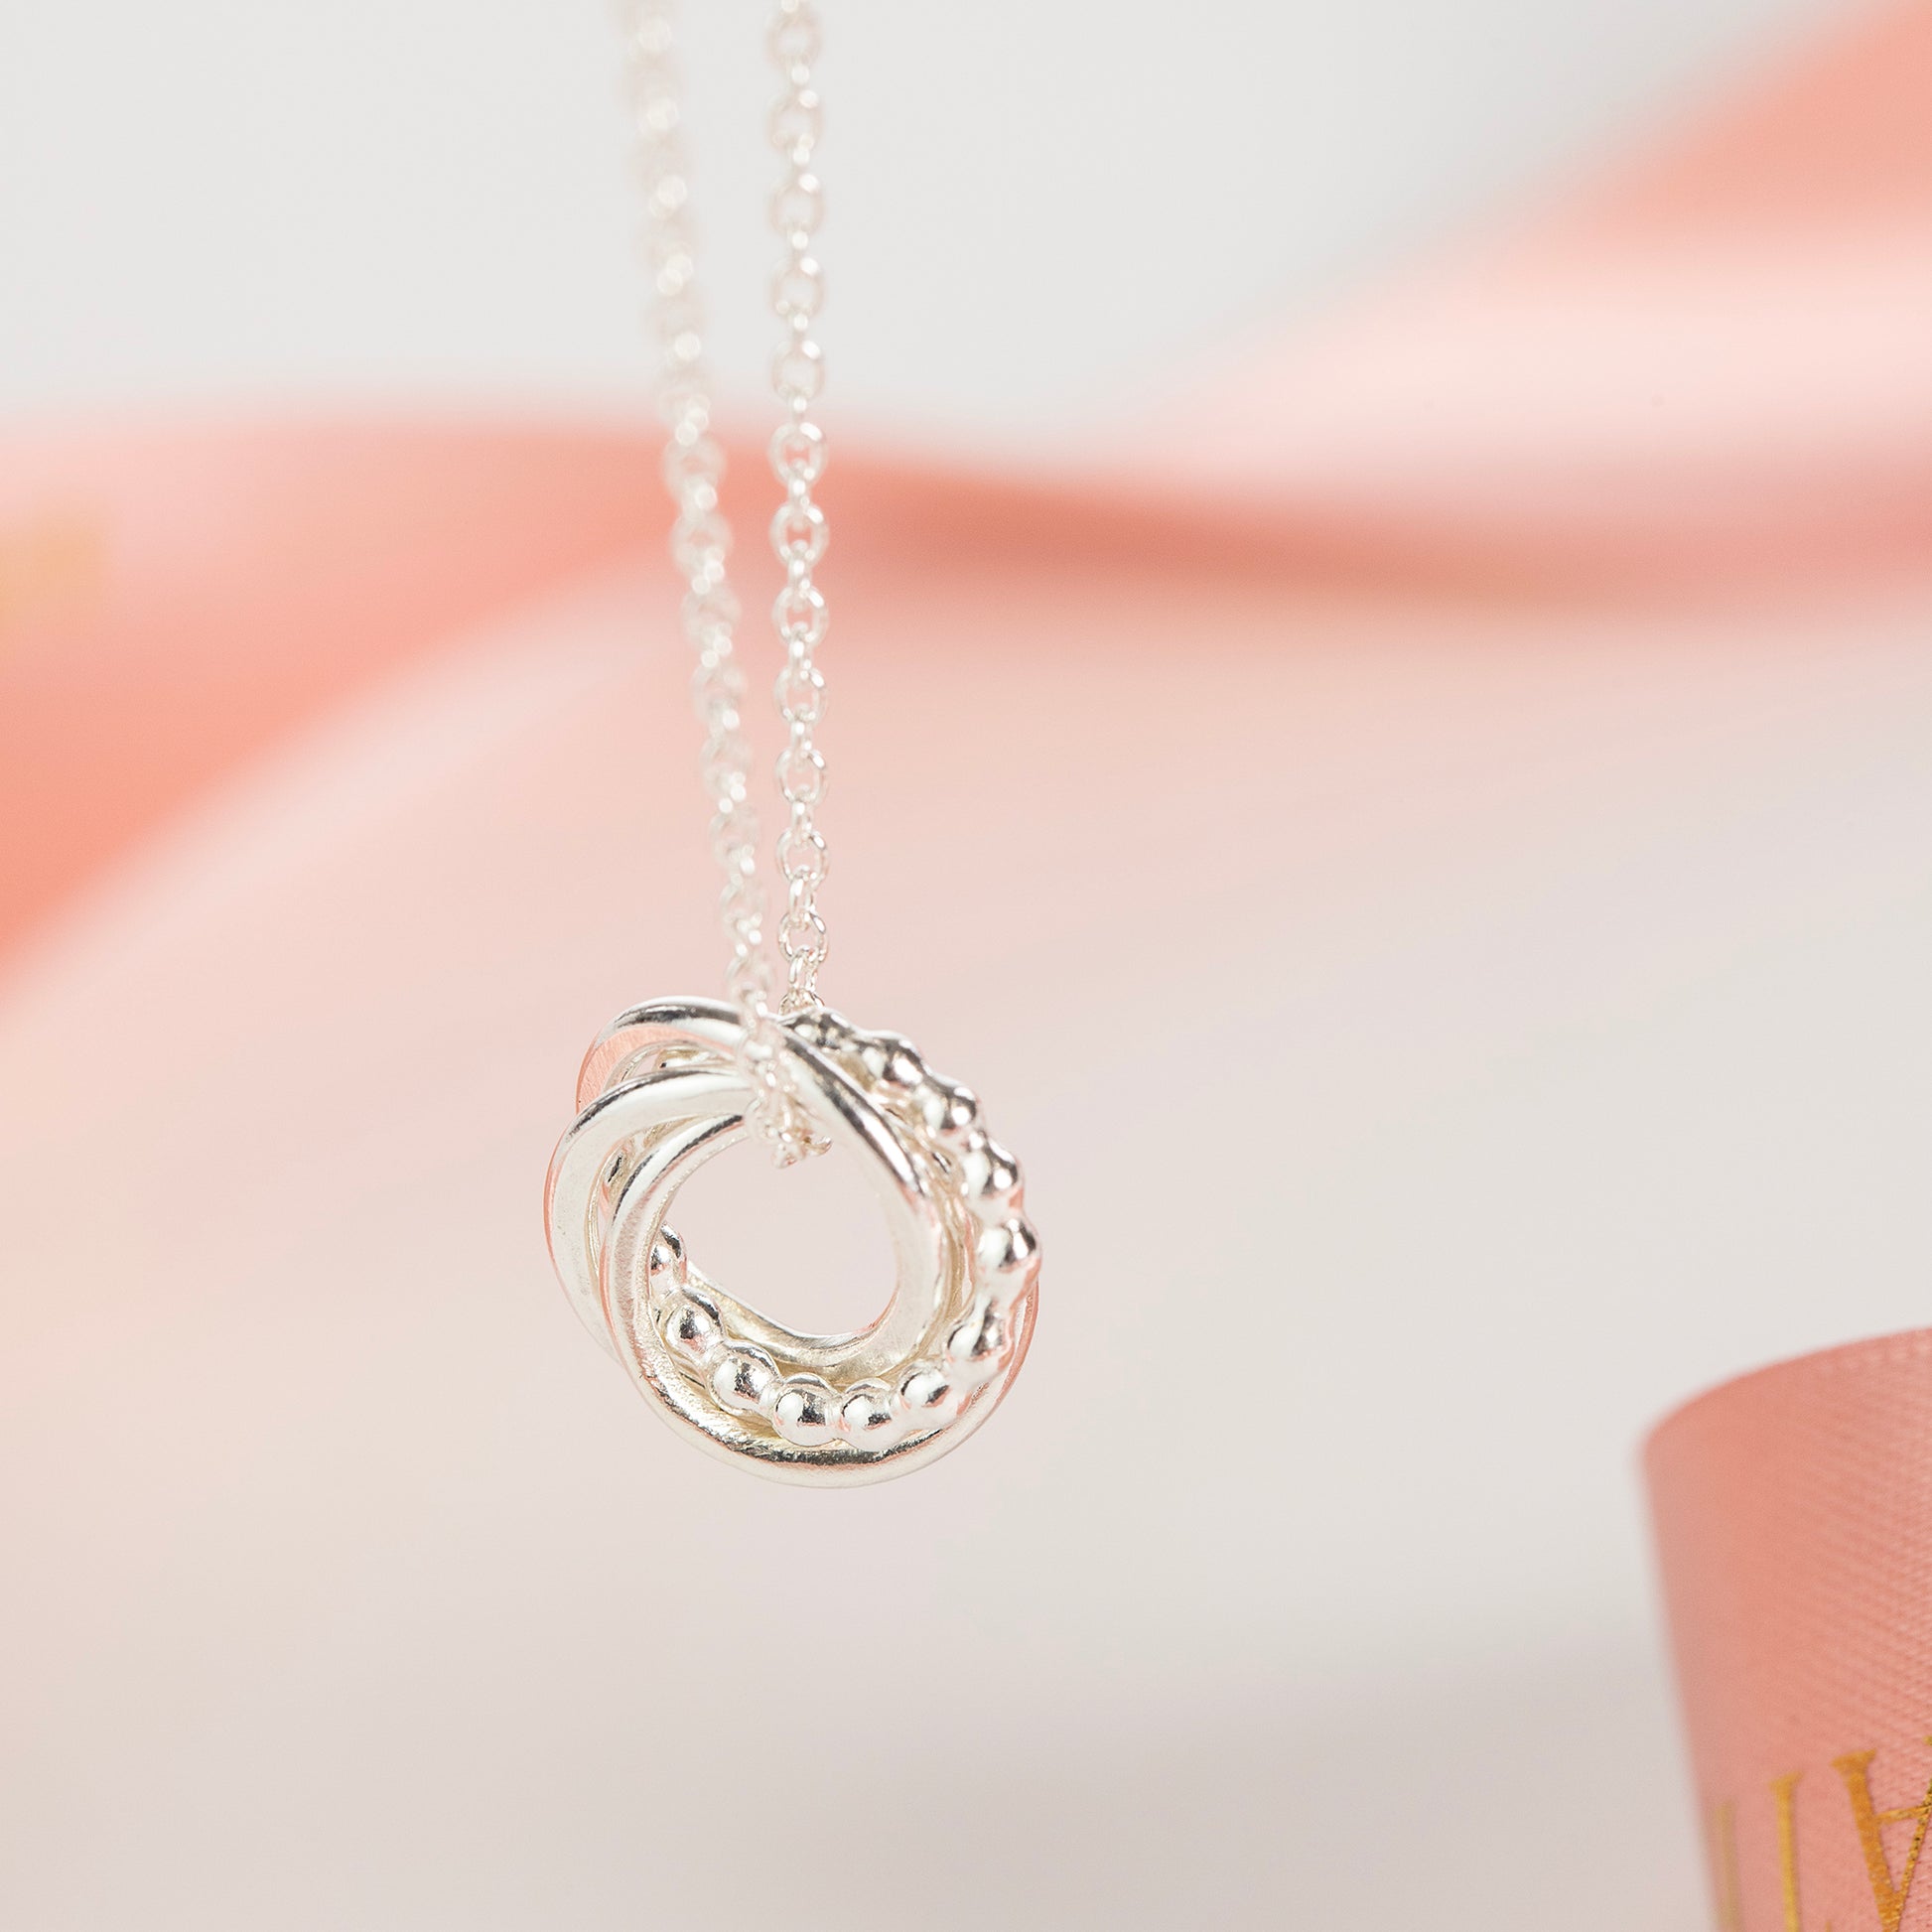 40th Birthday Necklace - The Original 4 Links for 4 Decades Necklace - Silver Love Knot